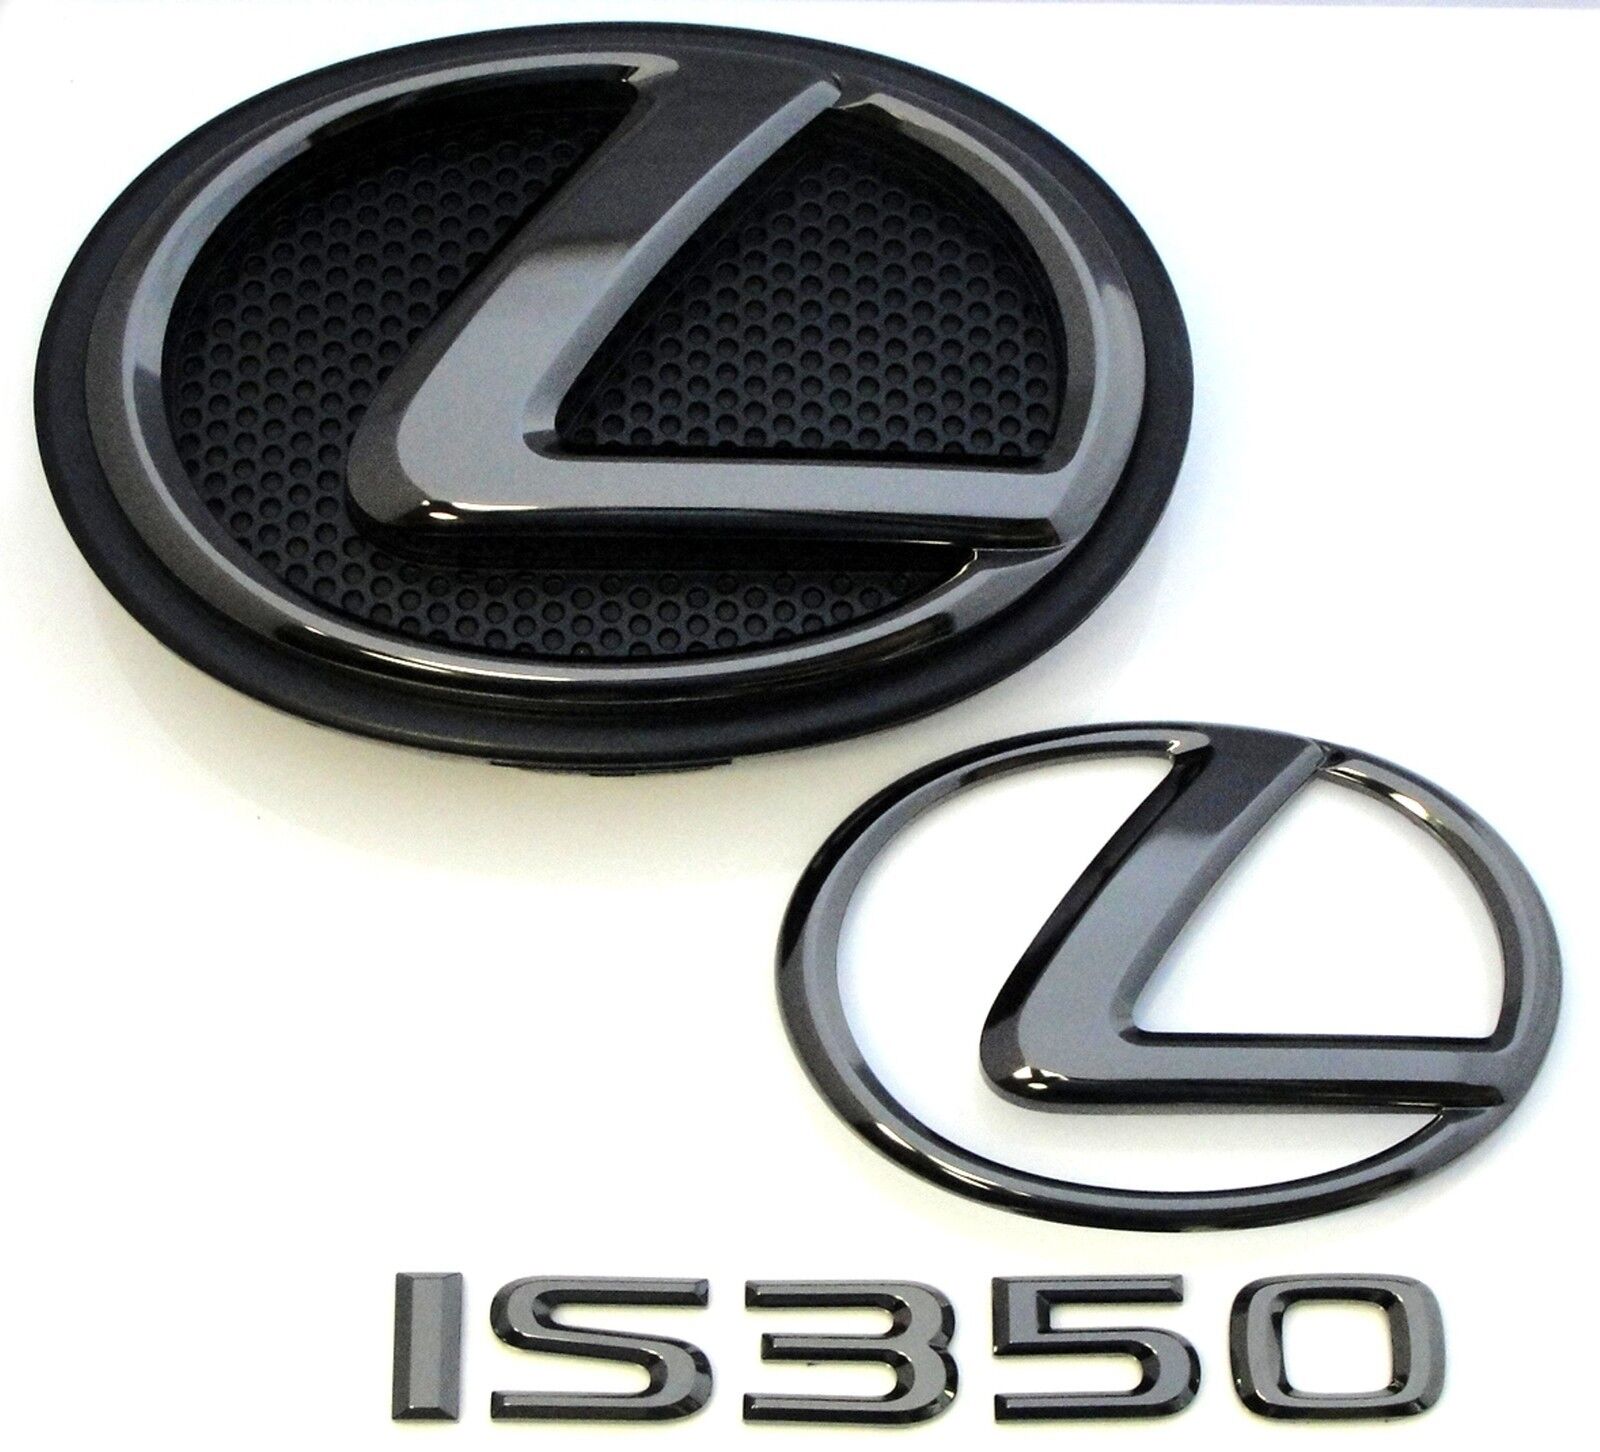 FOR: 2014 2015 2016 LEXUS IS350 BLACK PEARL PLATED EMBLEM KIT